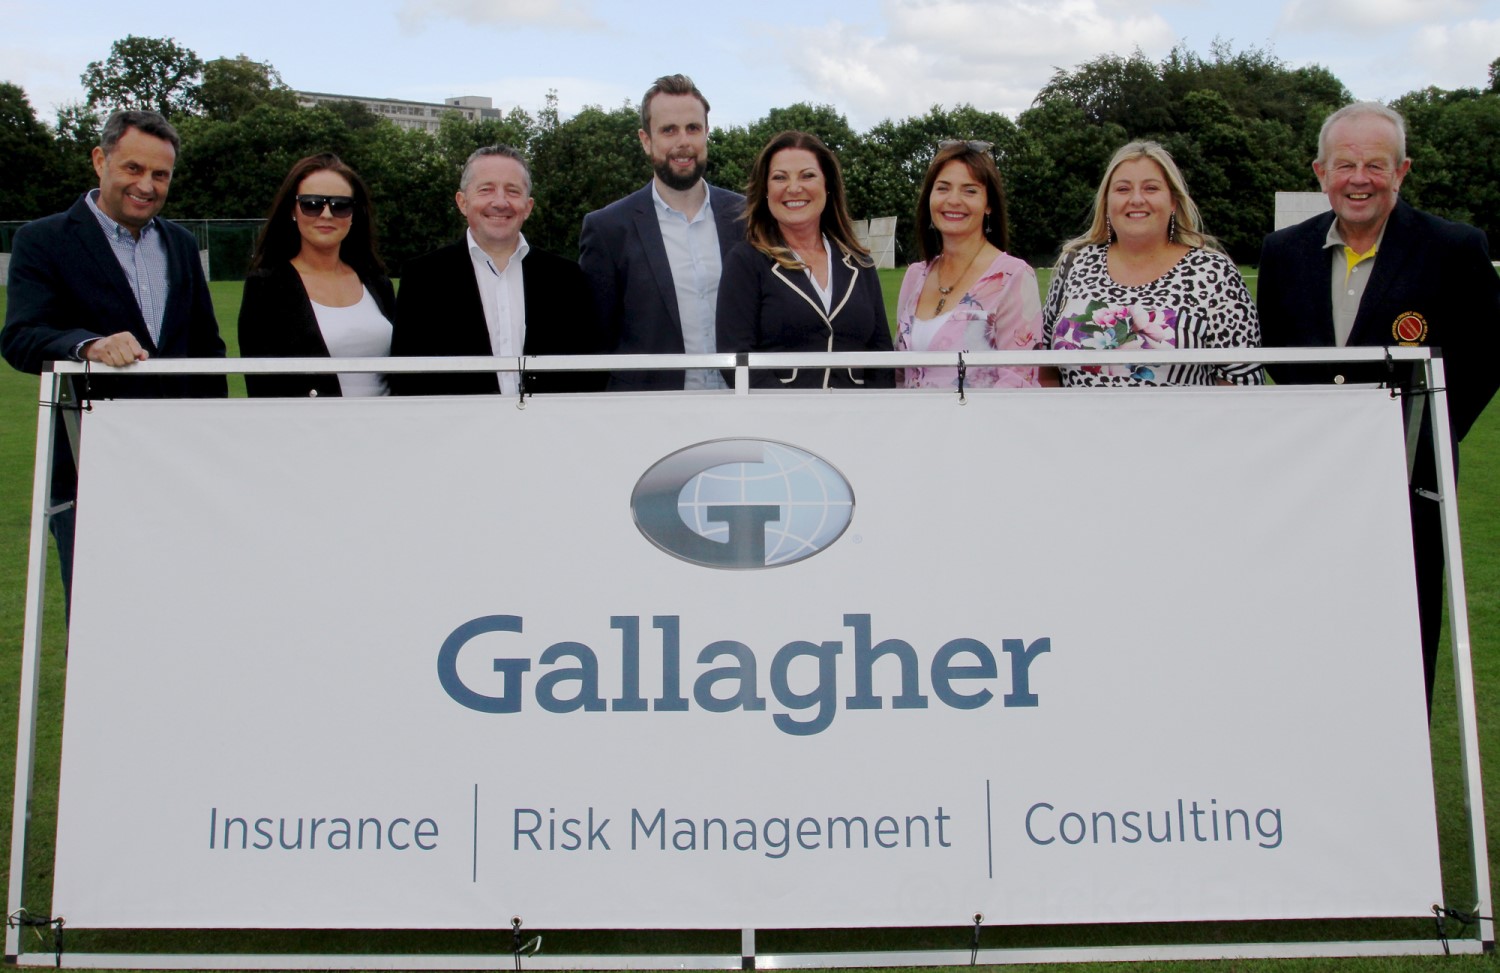 Gallaghers’ representatives at today’s match